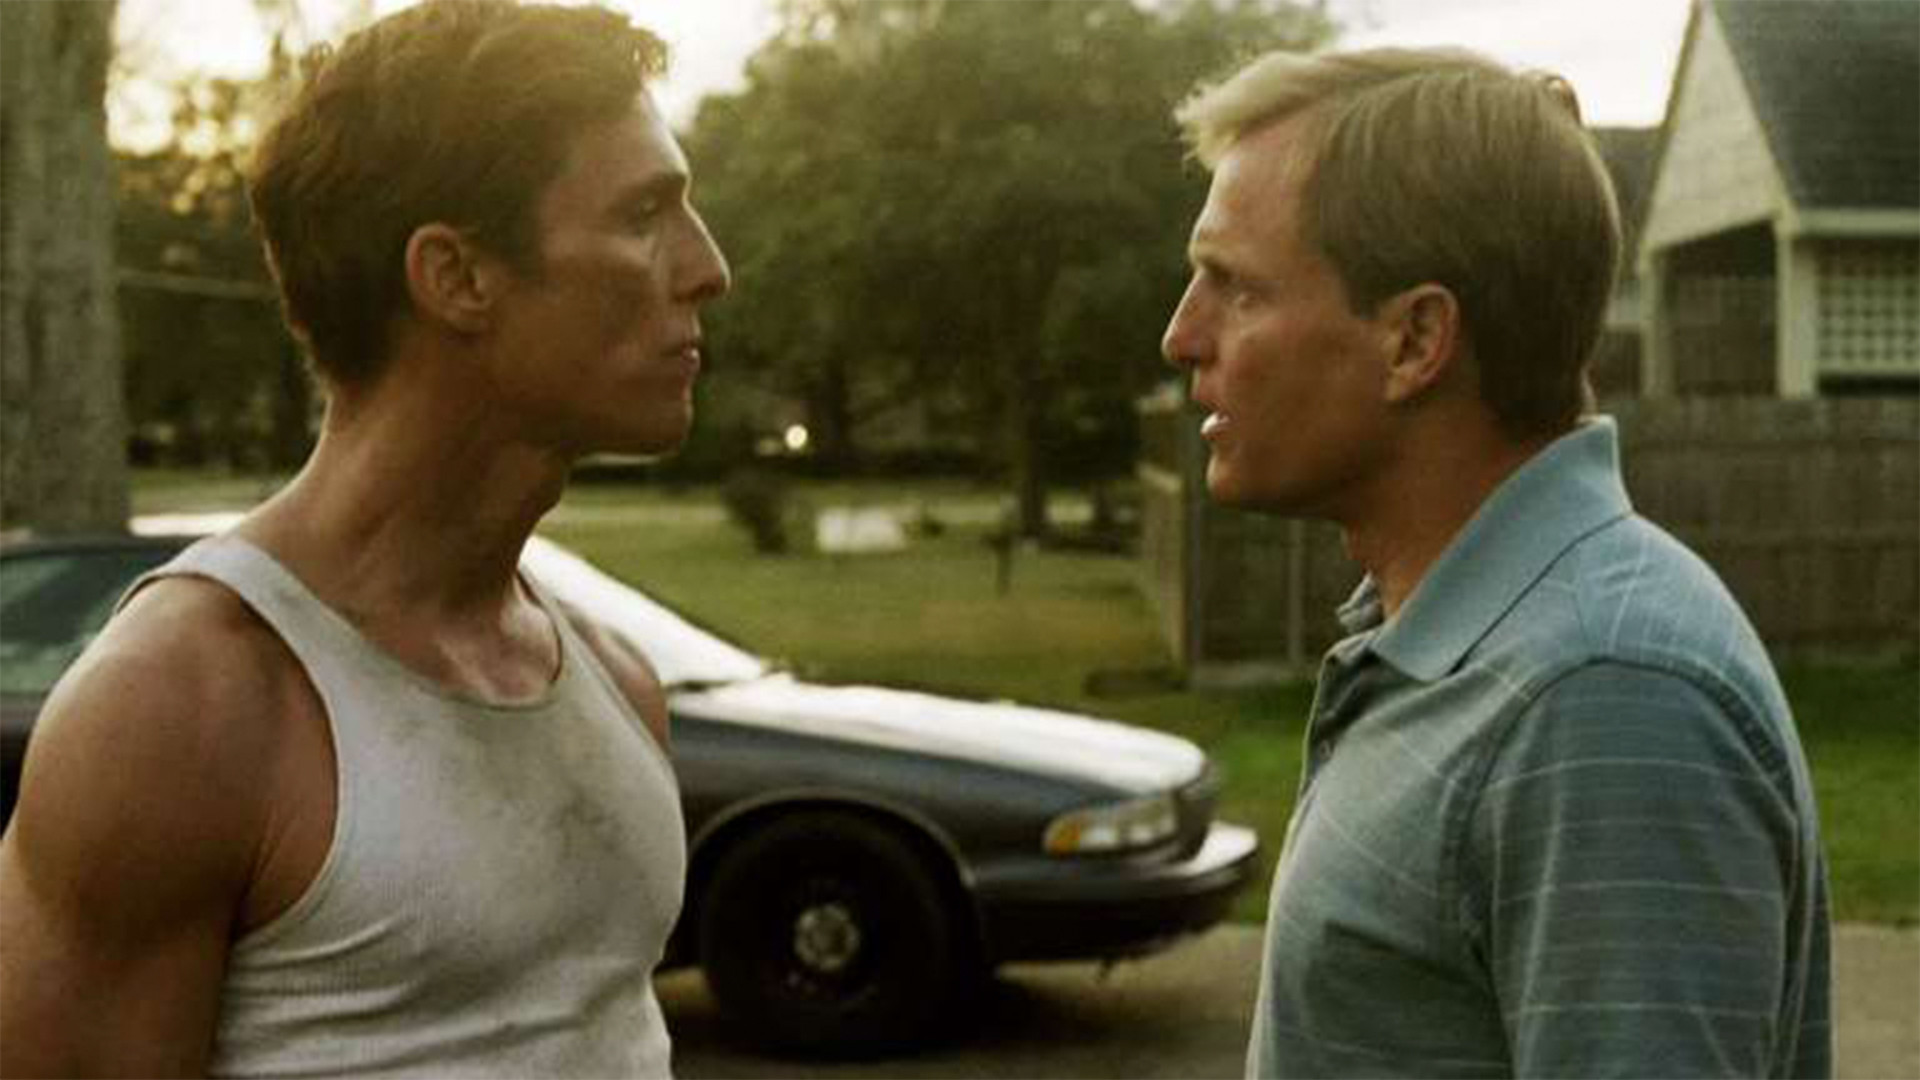 Rust cohle and marty фото 88